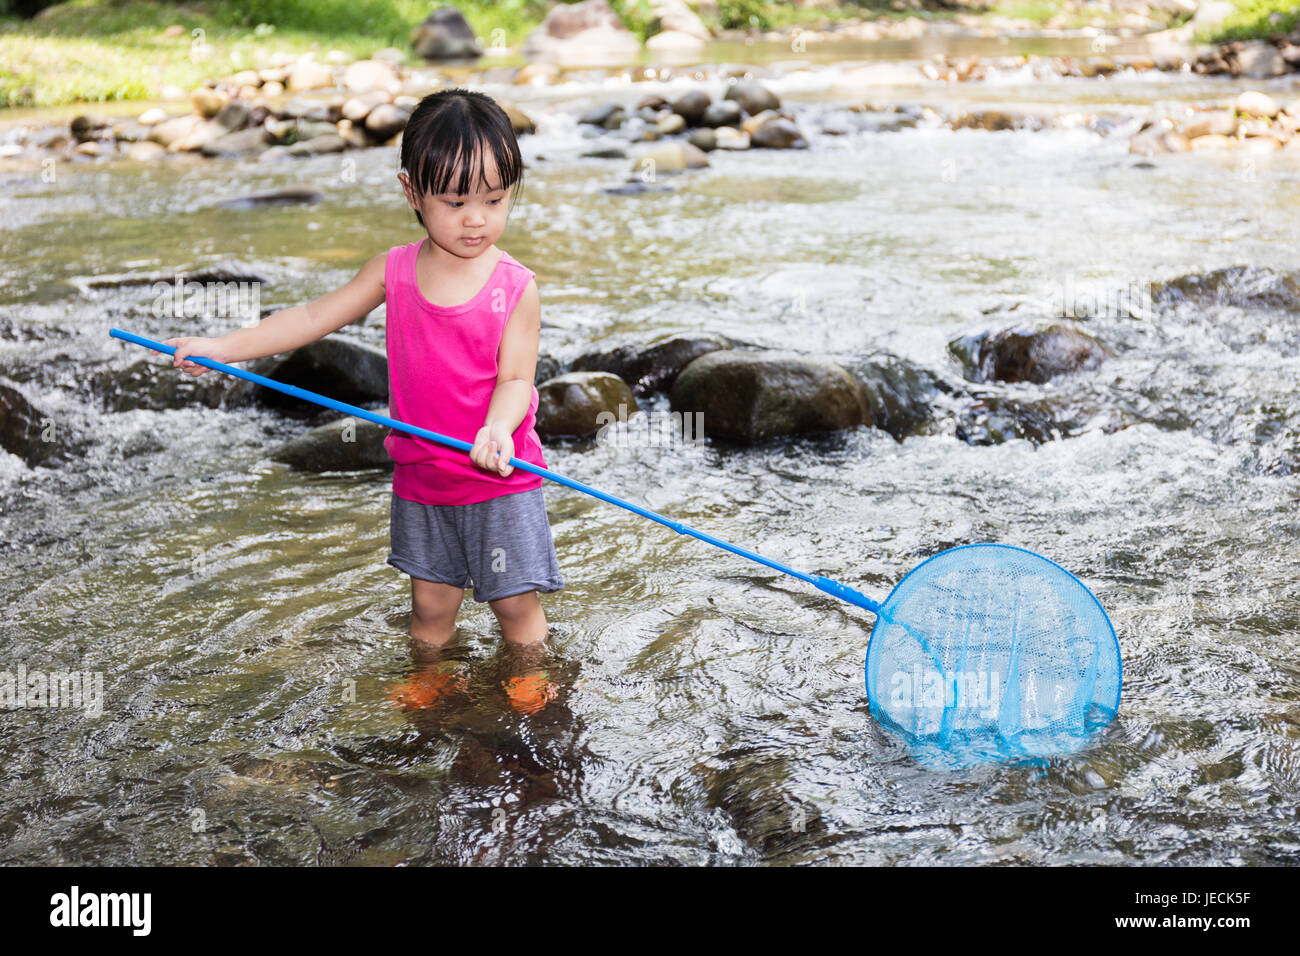 https://c8.alamy.com/comp/JECK5F/asian-chinese-little-girl-catching-fish-with-fishing-net-in-the-creek-JECK5F.jpg